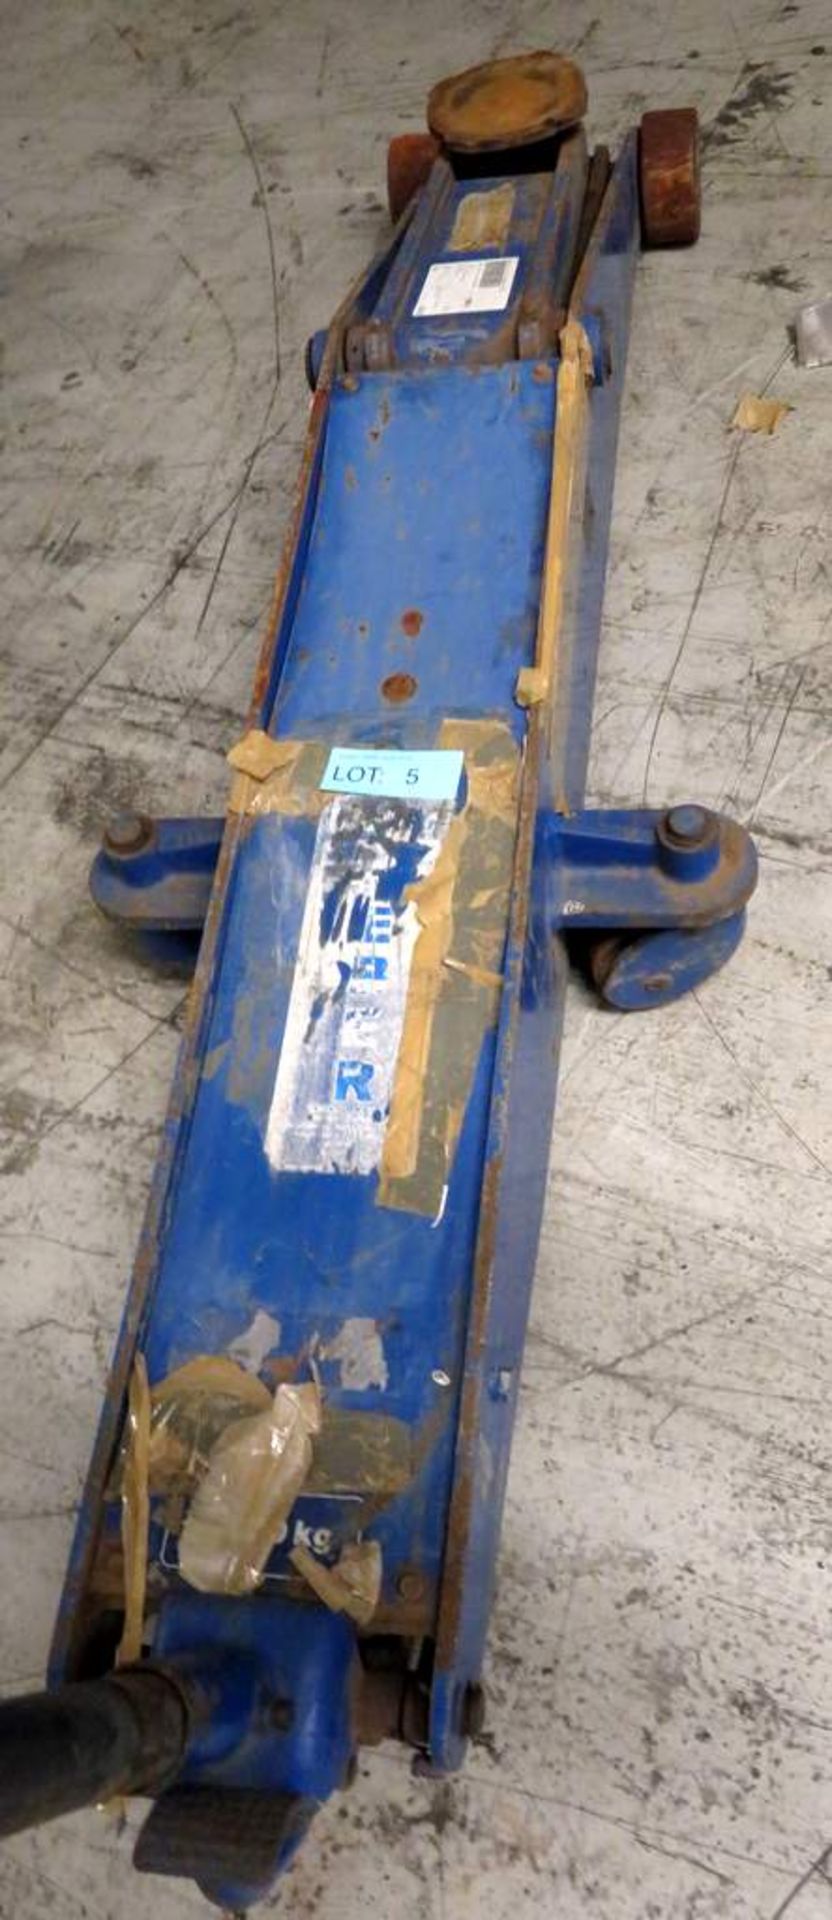 Weber 10 Tonne Vehicle Trolley Jack Complete With Handle - WDK100LQ - Working Condition - Image 3 of 7